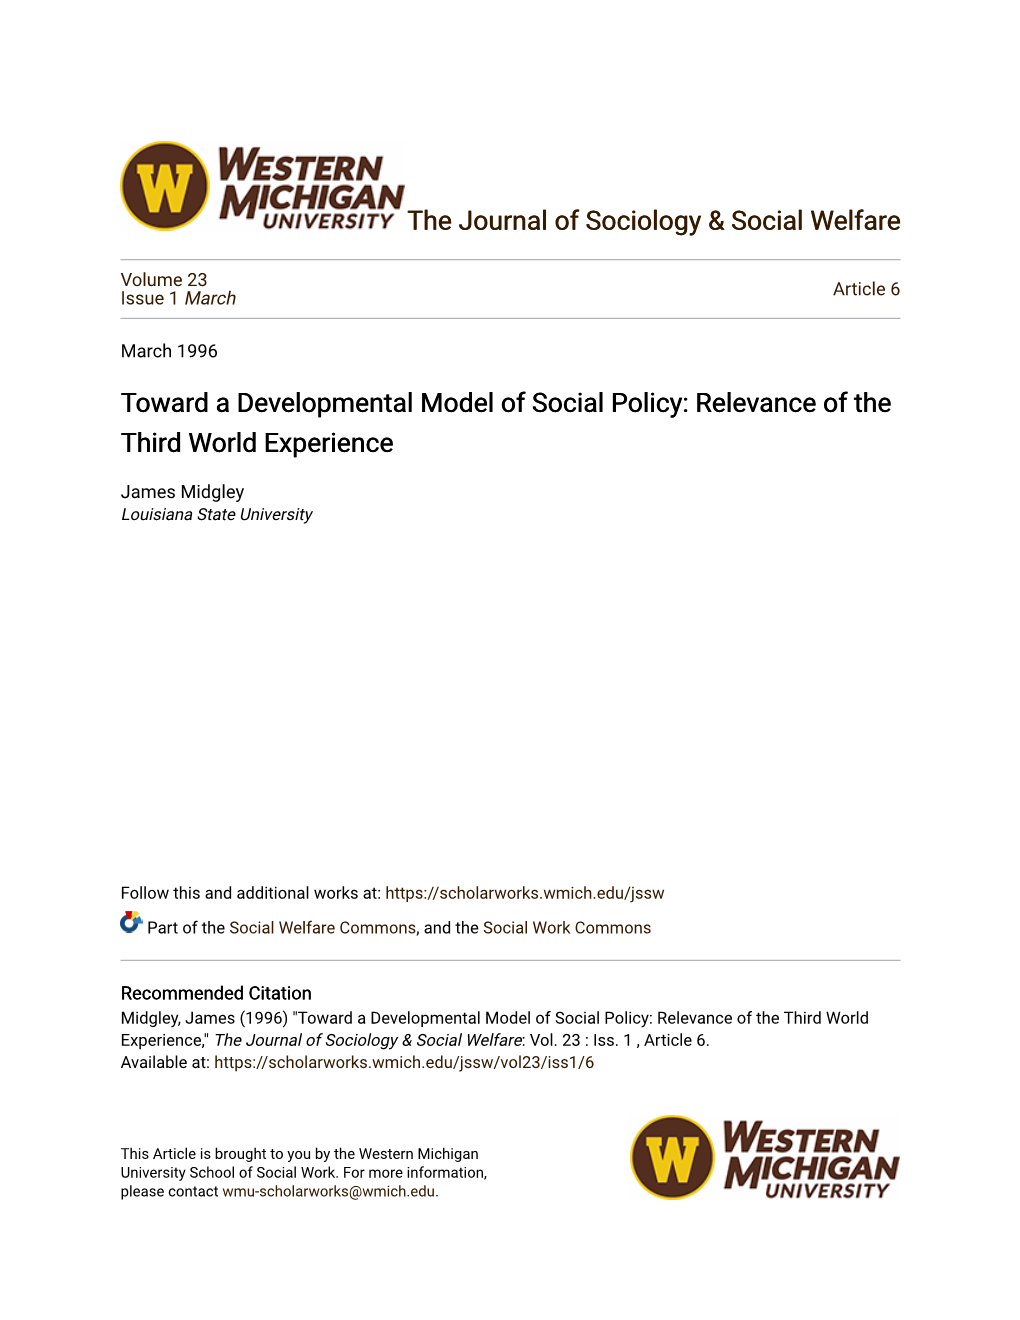 Toward a Developmental Model of Social Policy: Relevance of the Third World Experience